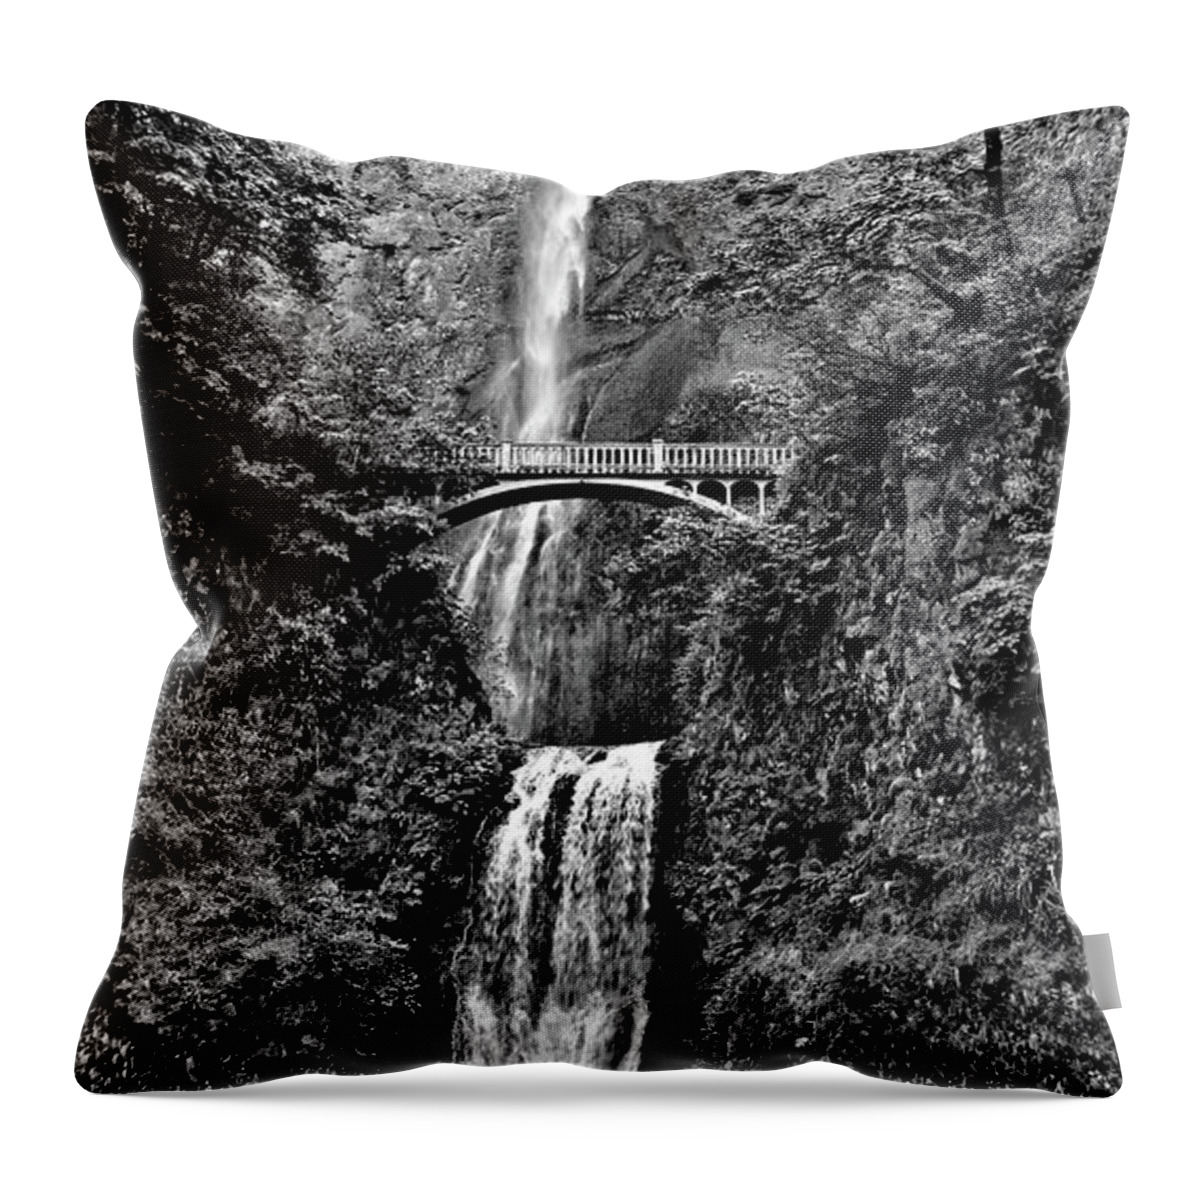 Postponed Destiny Throw Pillow featuring the photograph Postponed Destiny -- Multnomah Falls at The Columbia River Gorge, Oregon by Darin Volpe